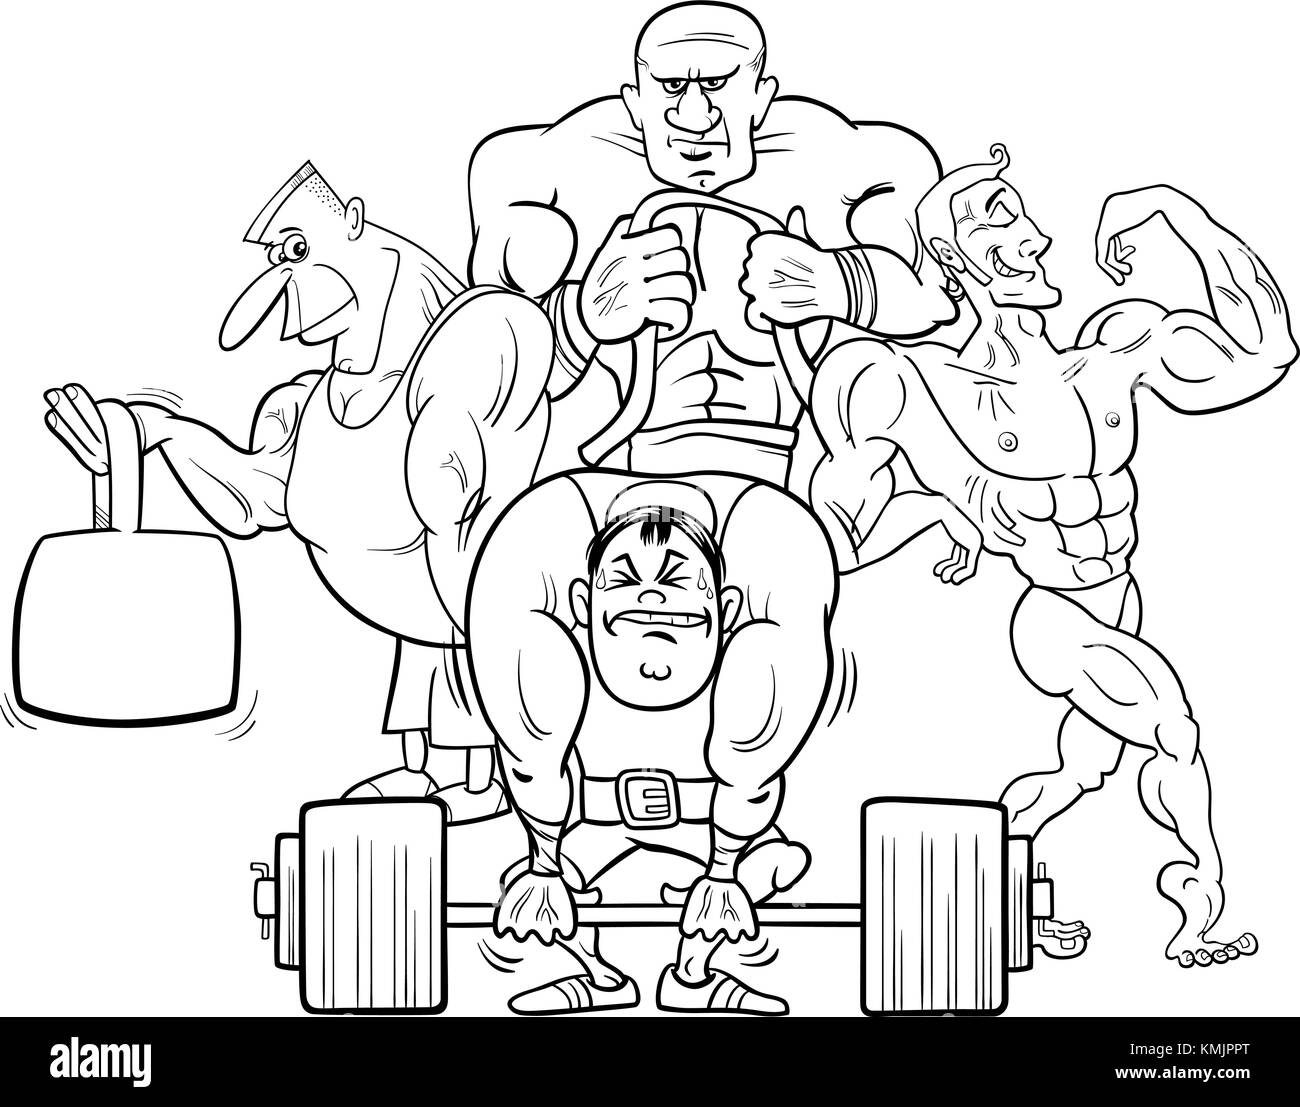 Black and White Coloring Book Cartoon Illustration of Muscular Men or Athletes at the Gym Stock Vector